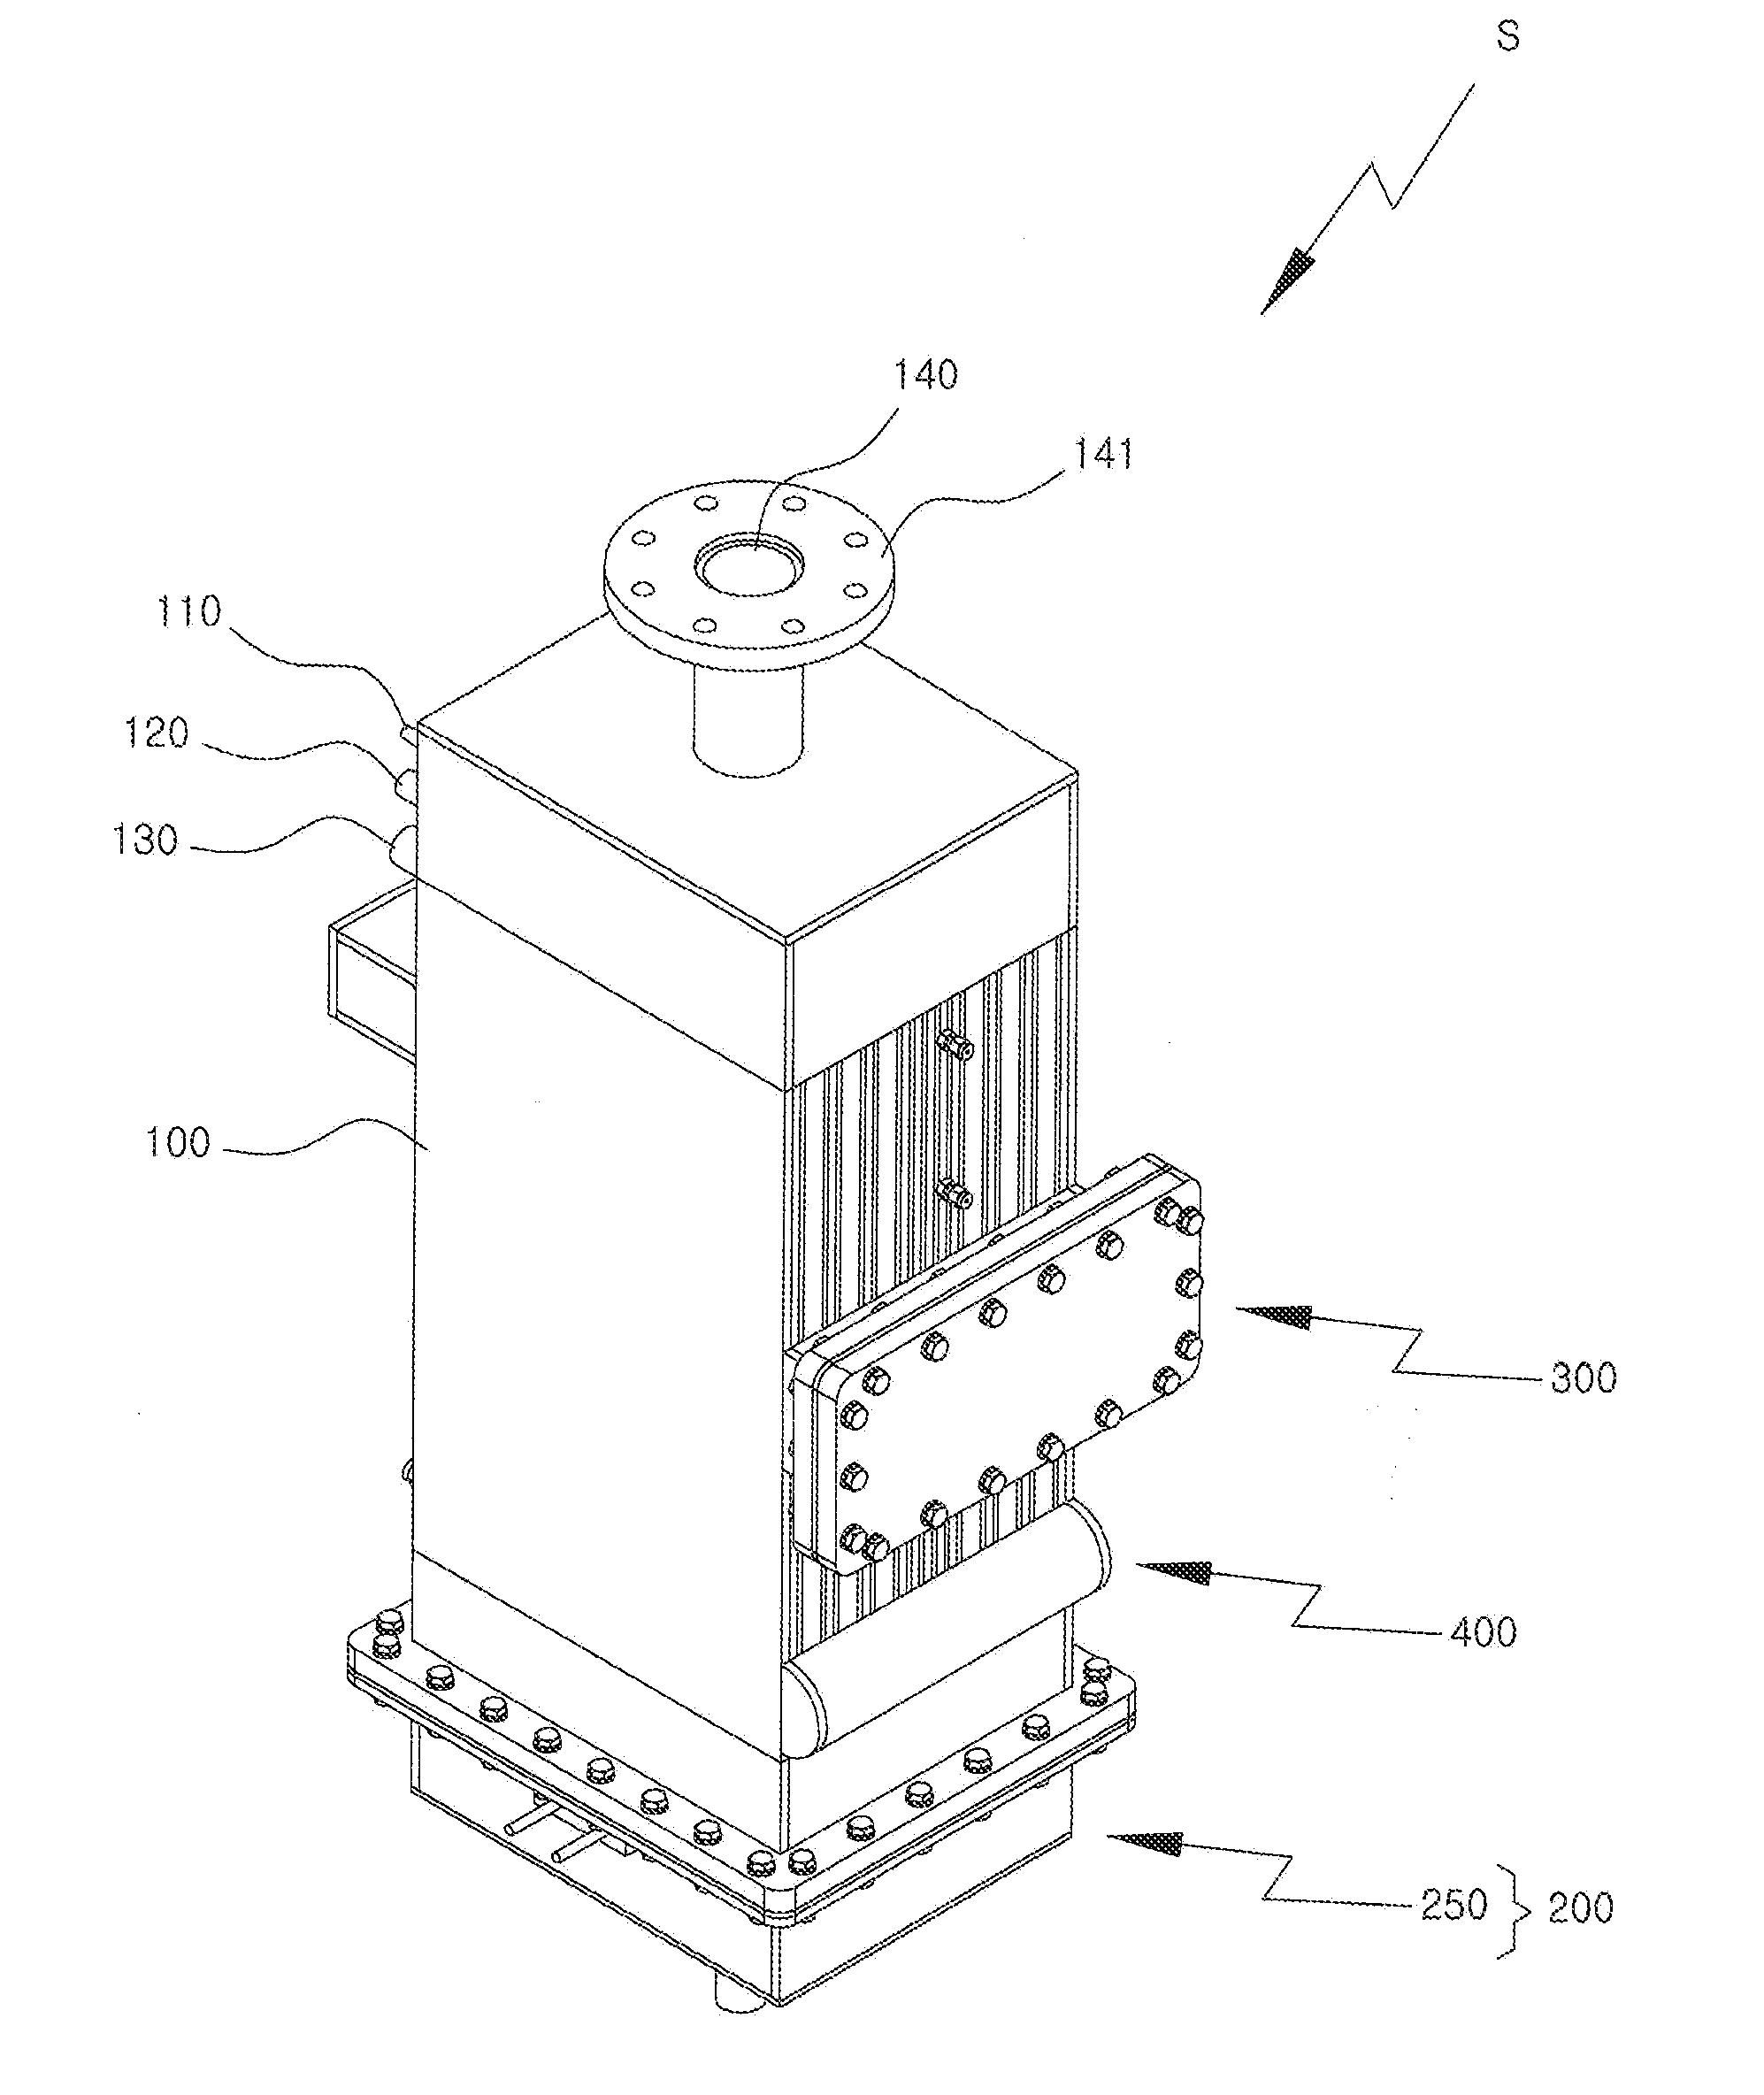 Multi-channel Upright Reformer for Fuel Cell Merged with Heater